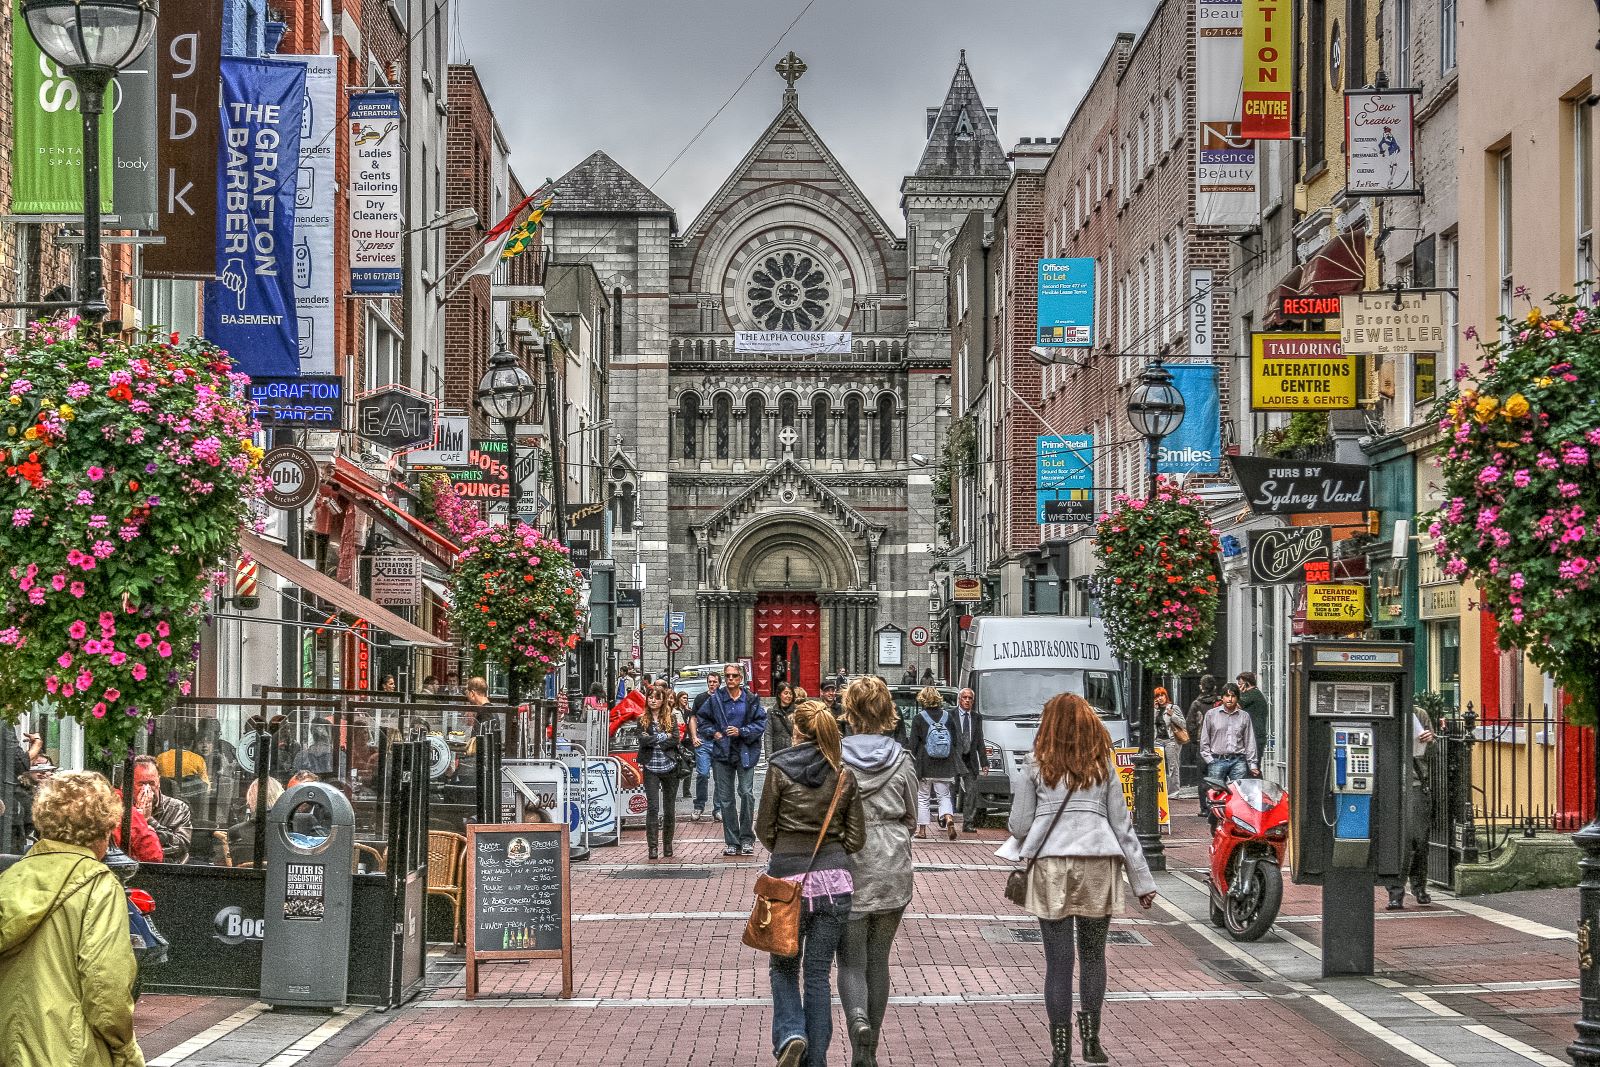 <p class="wp-caption-text">Image credit: Shutterstock / jamegaw</p>  <p>Grafton Street is more than Dublin’s shopping hub—it’s a lively strip where you’ll find street performers and local boutiques. It’s a grand spot for a stroll and a bit of window shopping.</p>